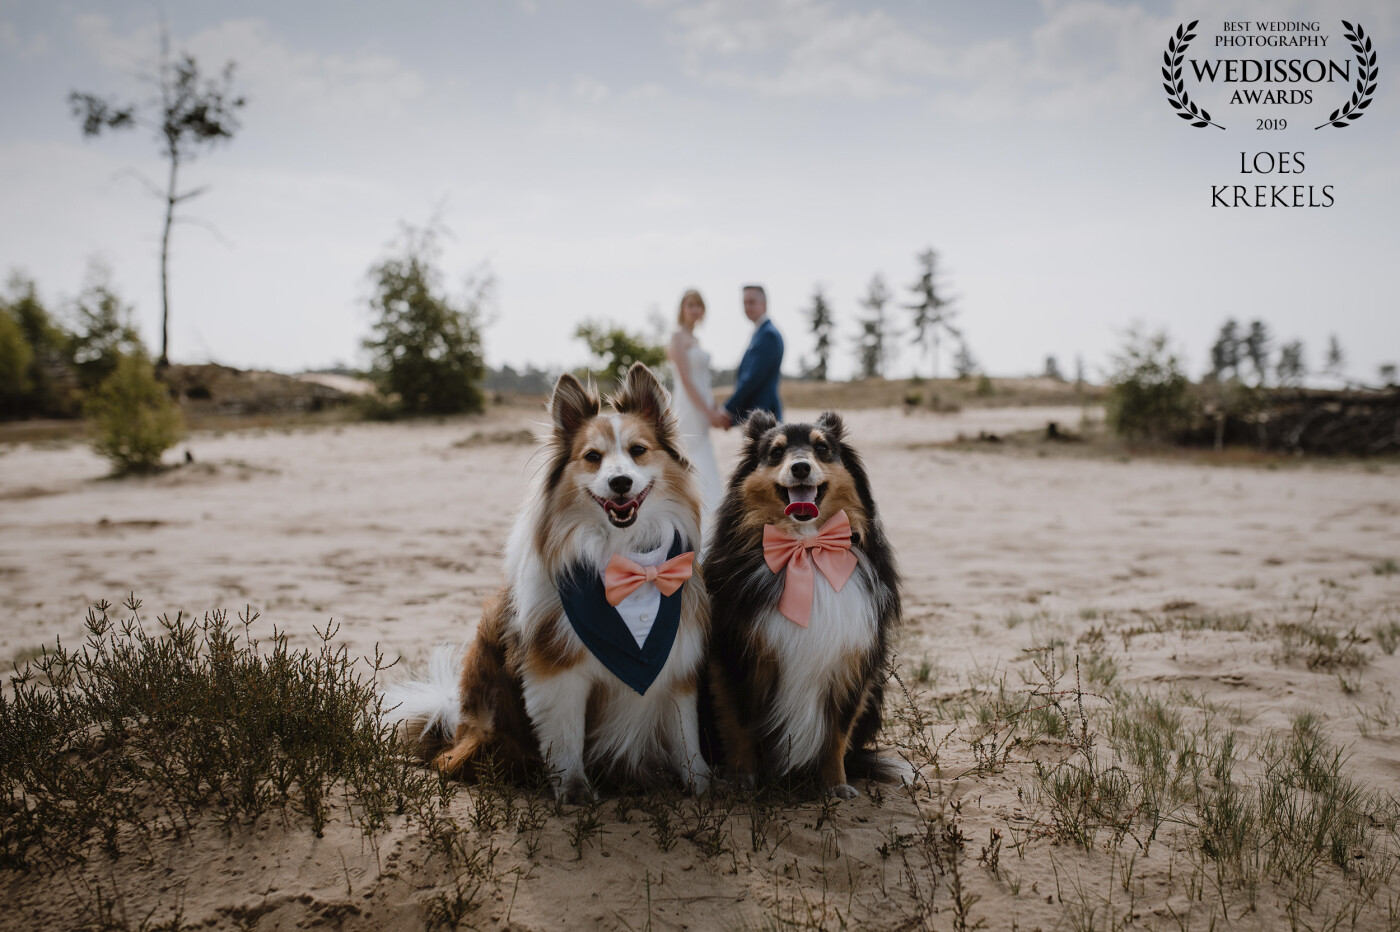 These two fluffy fur friends had their best day ever! Their Pawrents tied the knot and they just couldn't stop smiling. It was such a beautiful day, what more could they ever wish for?